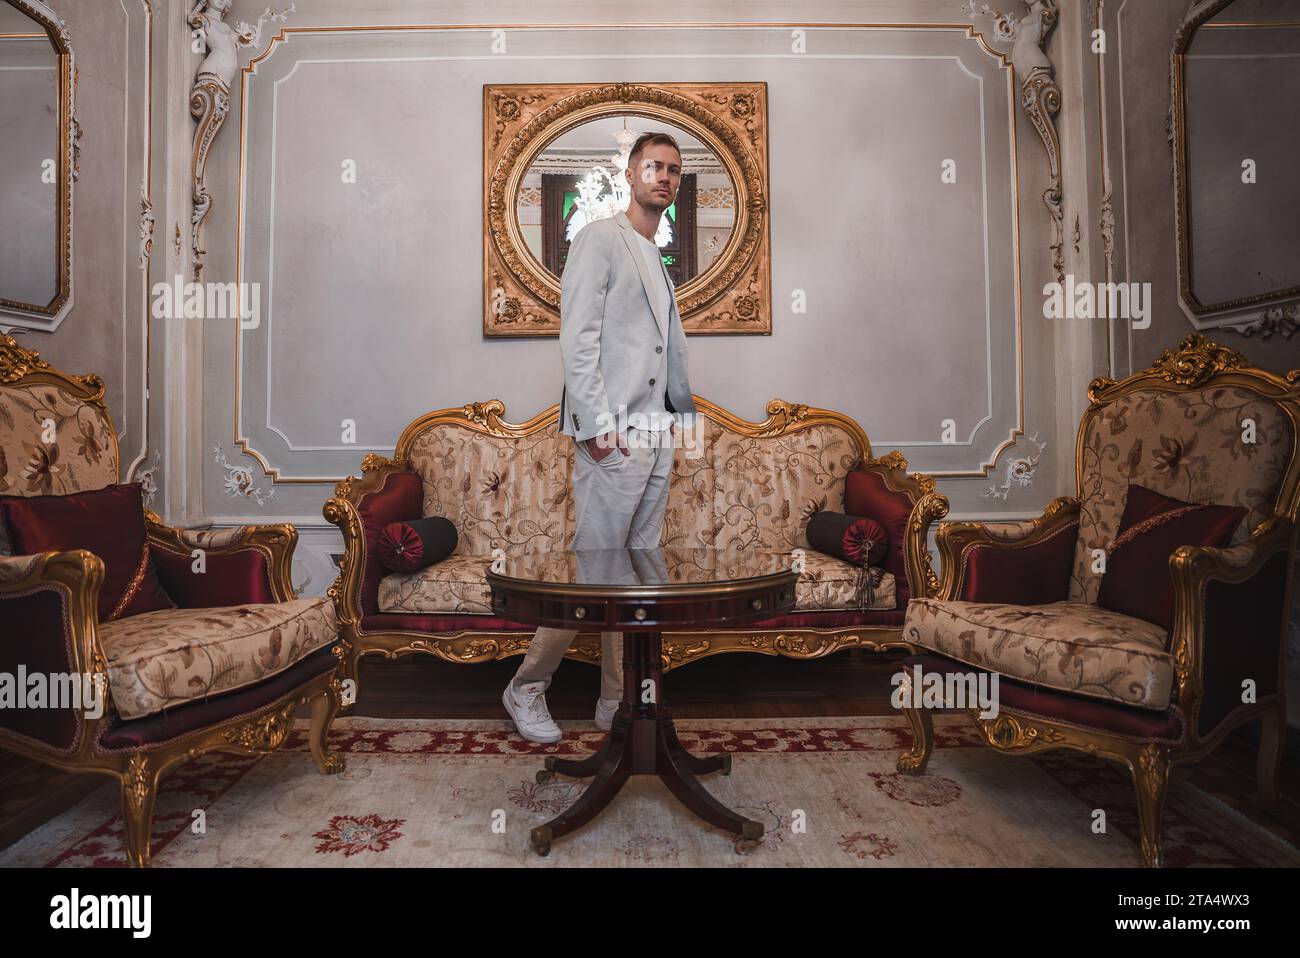 Elegant man in suit standing on luxurious Venetian-style couch in ornate room. Stock Photo